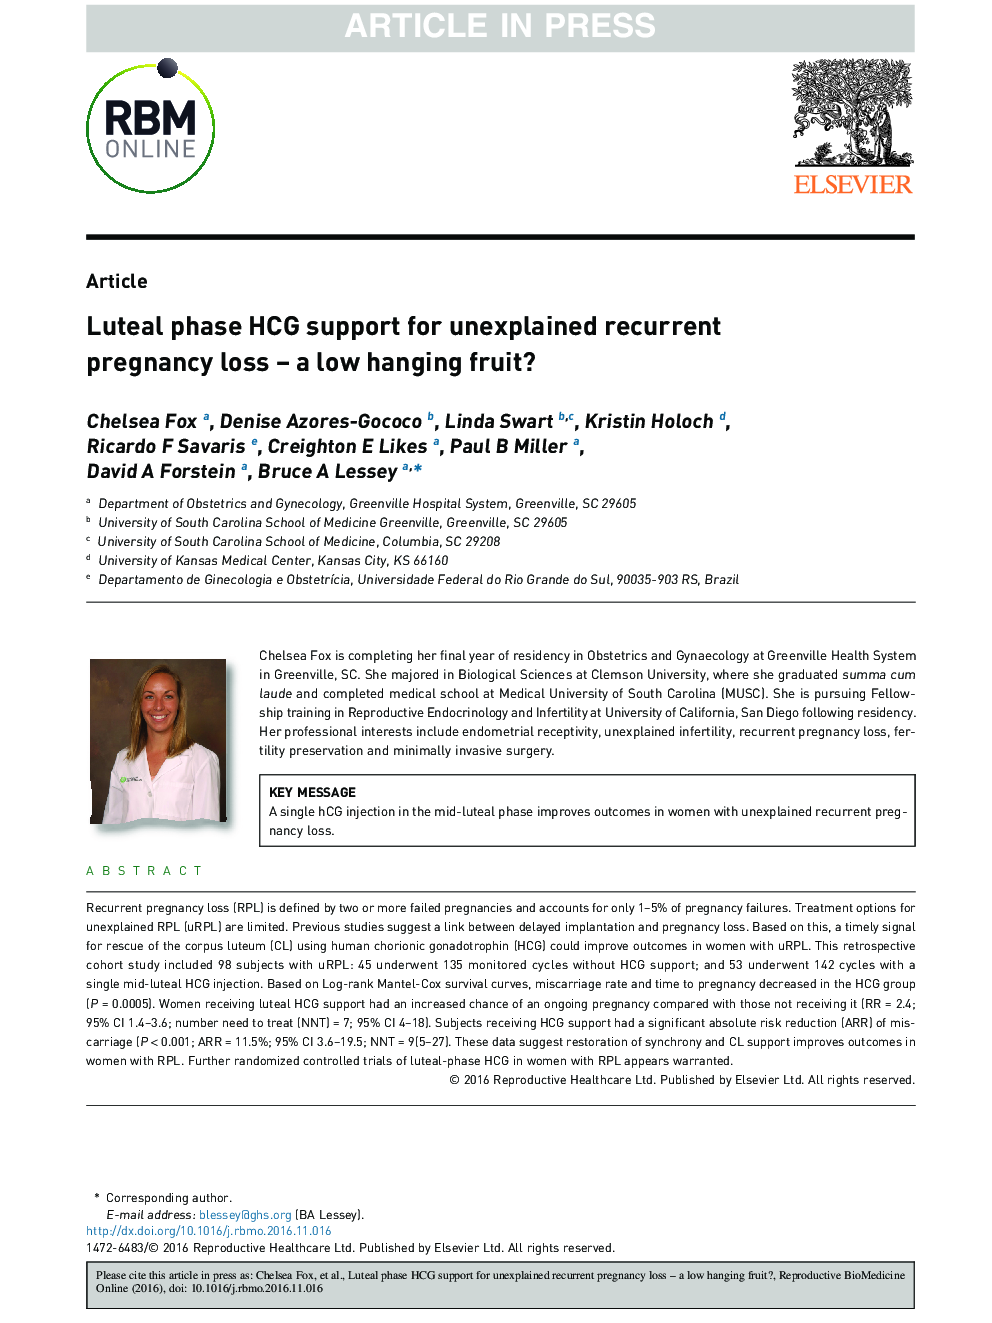 Luteal phase HCG support for unexplained recurrent pregnancy loss - a low hanging fruit?